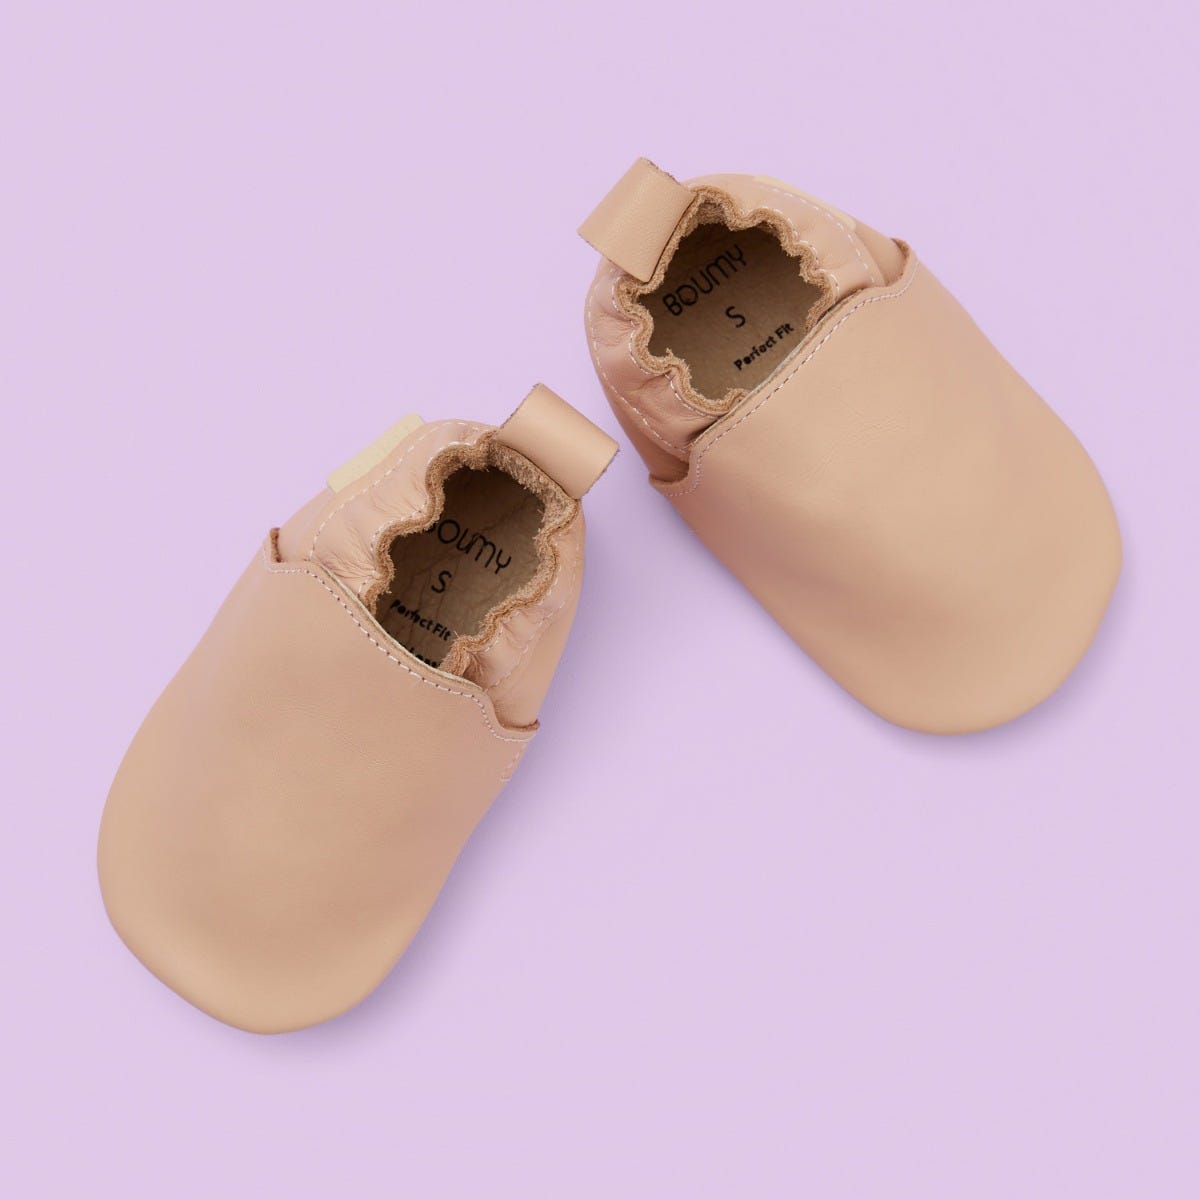 Boumy Soft Leather Shoes in Pastel Pink size 6 to 12 months